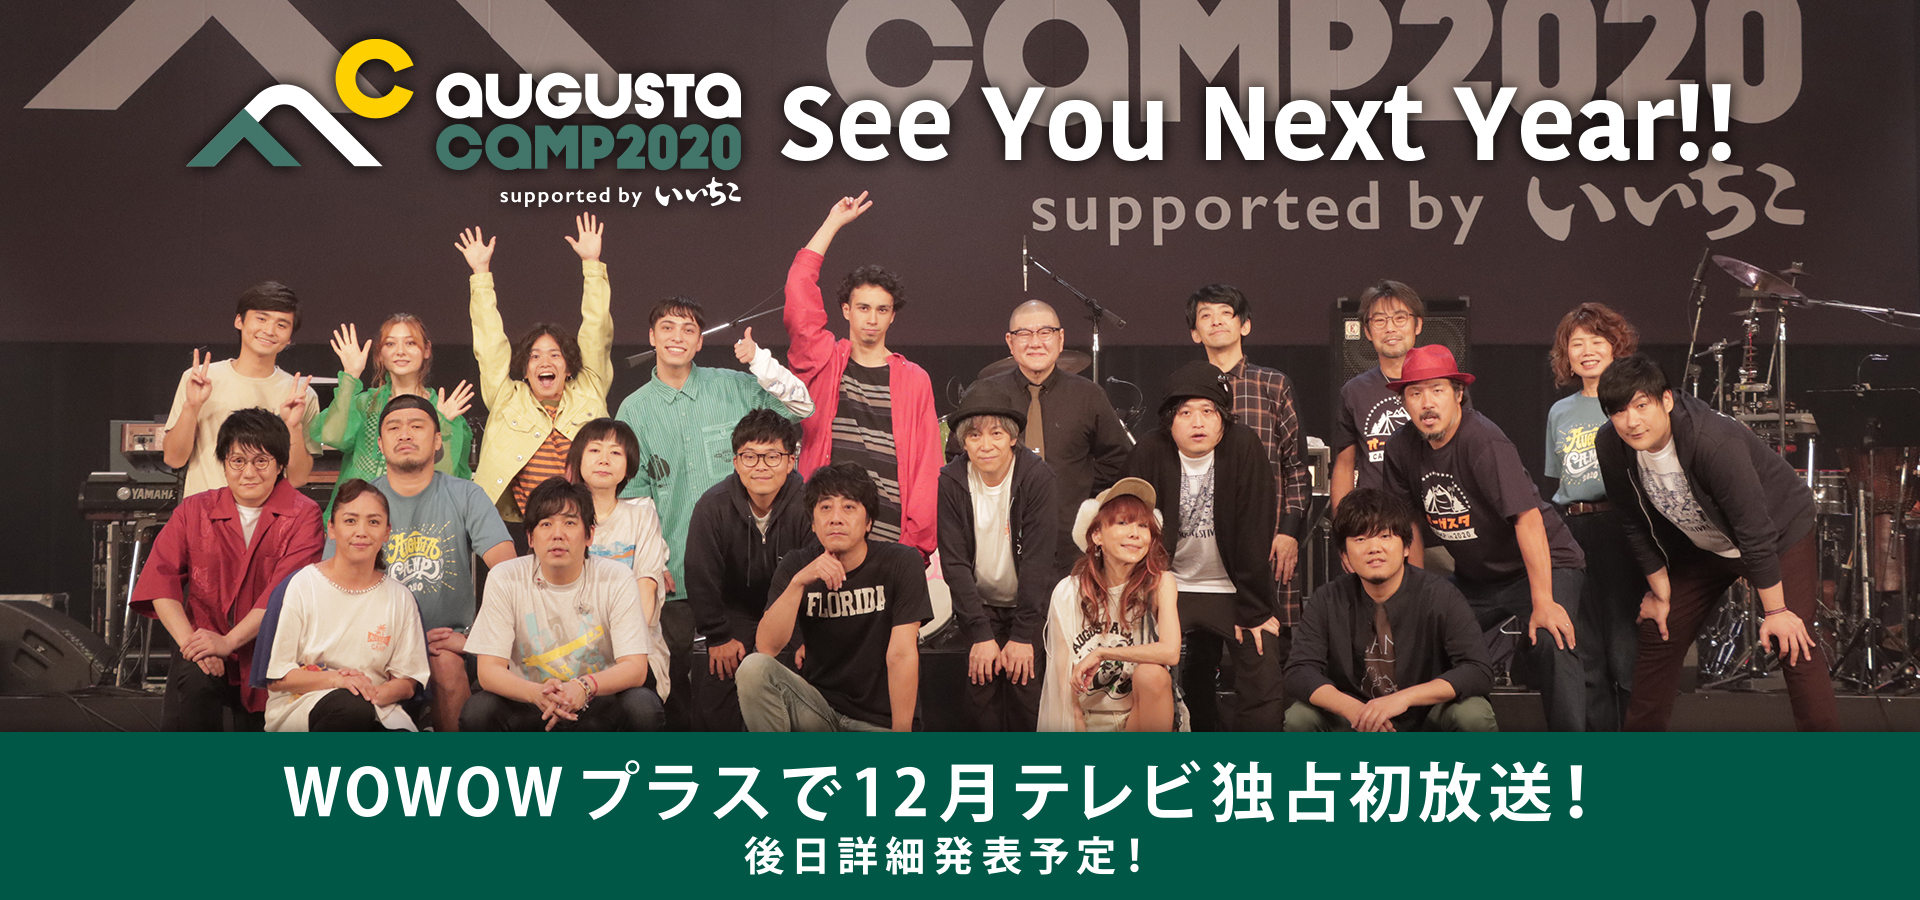 See You Next Year!!